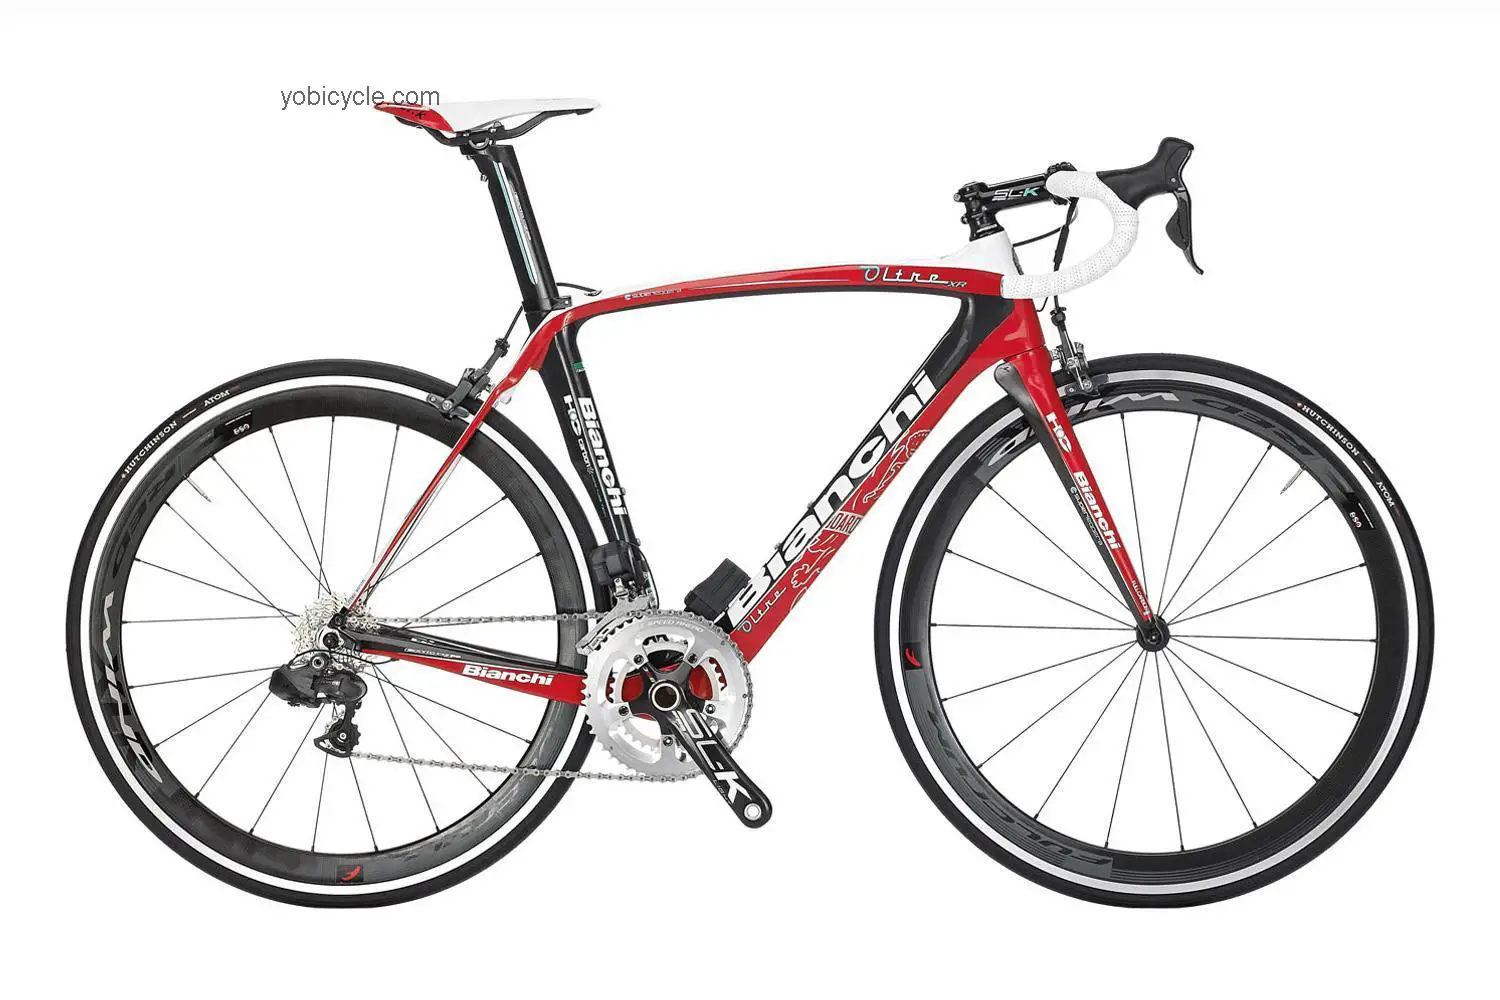 Bianchi Oltre XR Ultegra Di2 competitors and comparison tool online specs and performance